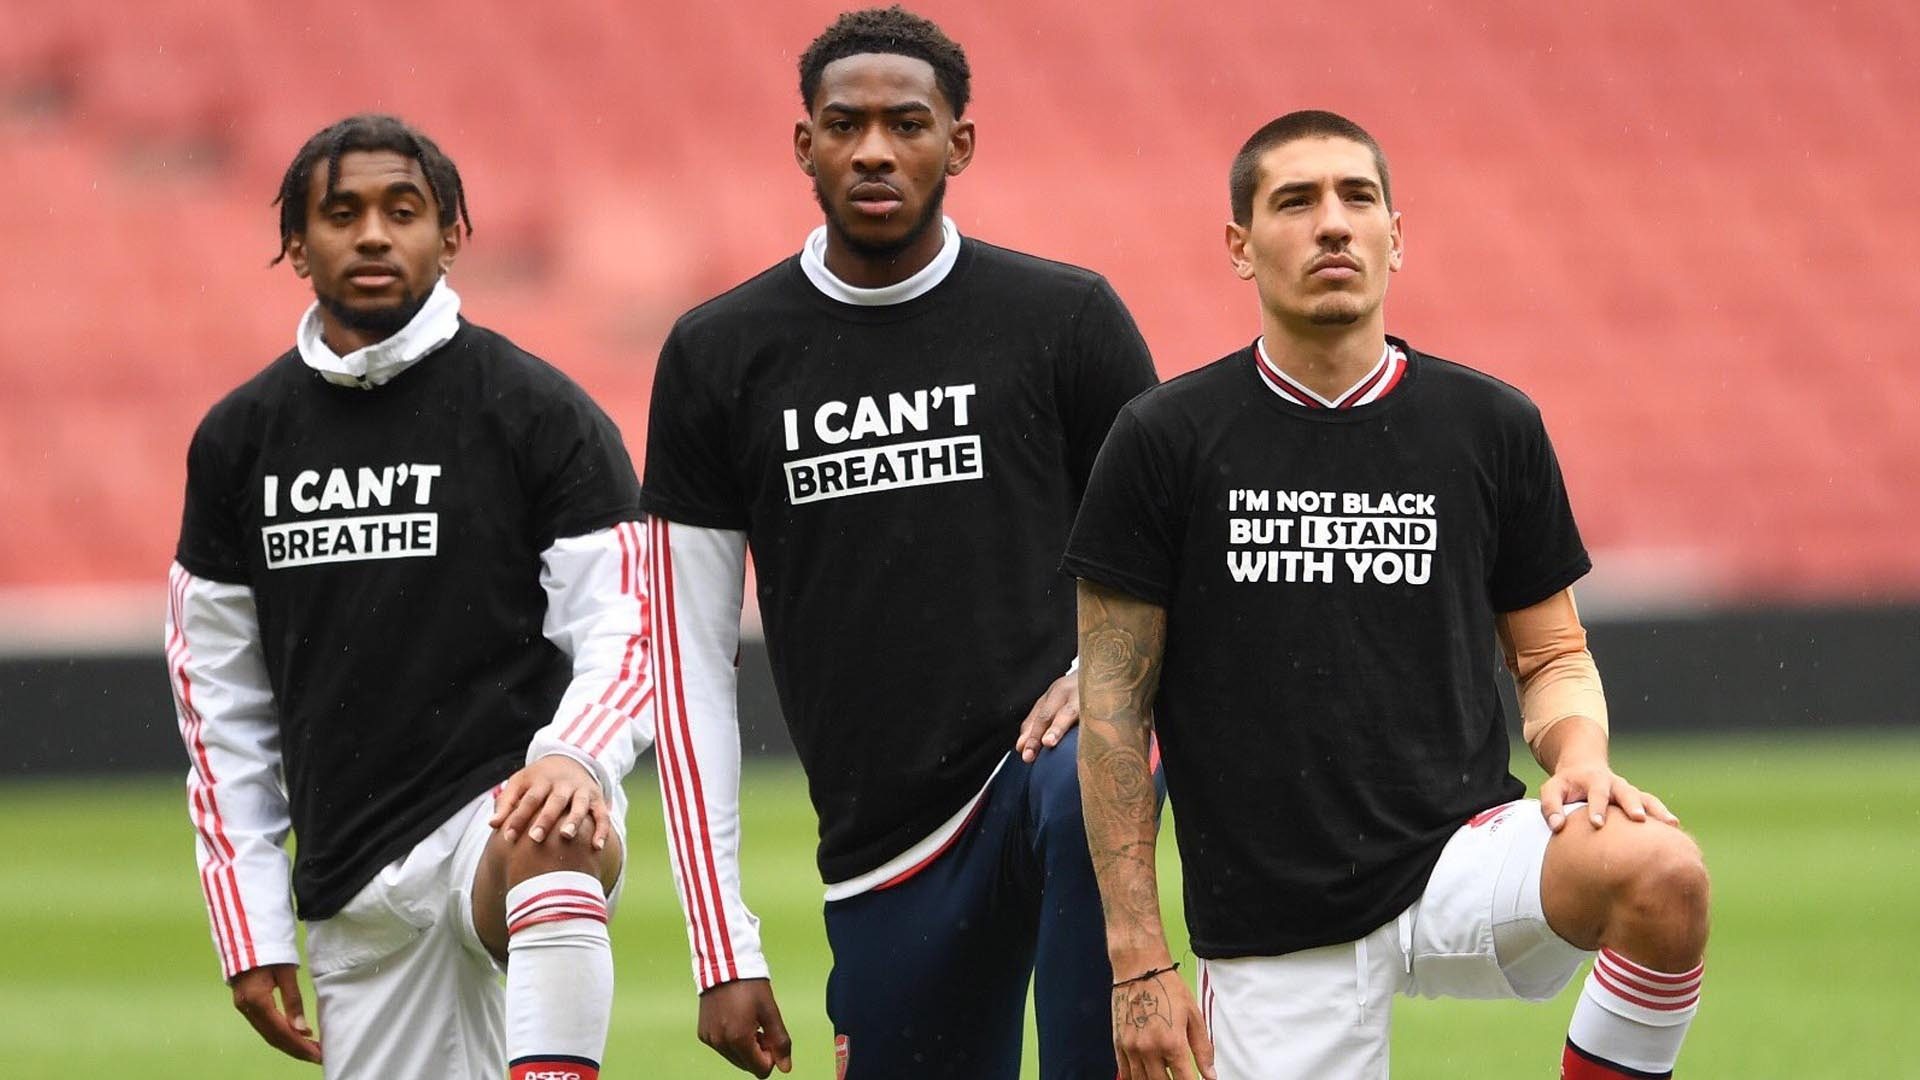 Premier League to replace jersey names with 'Black Lives Matter